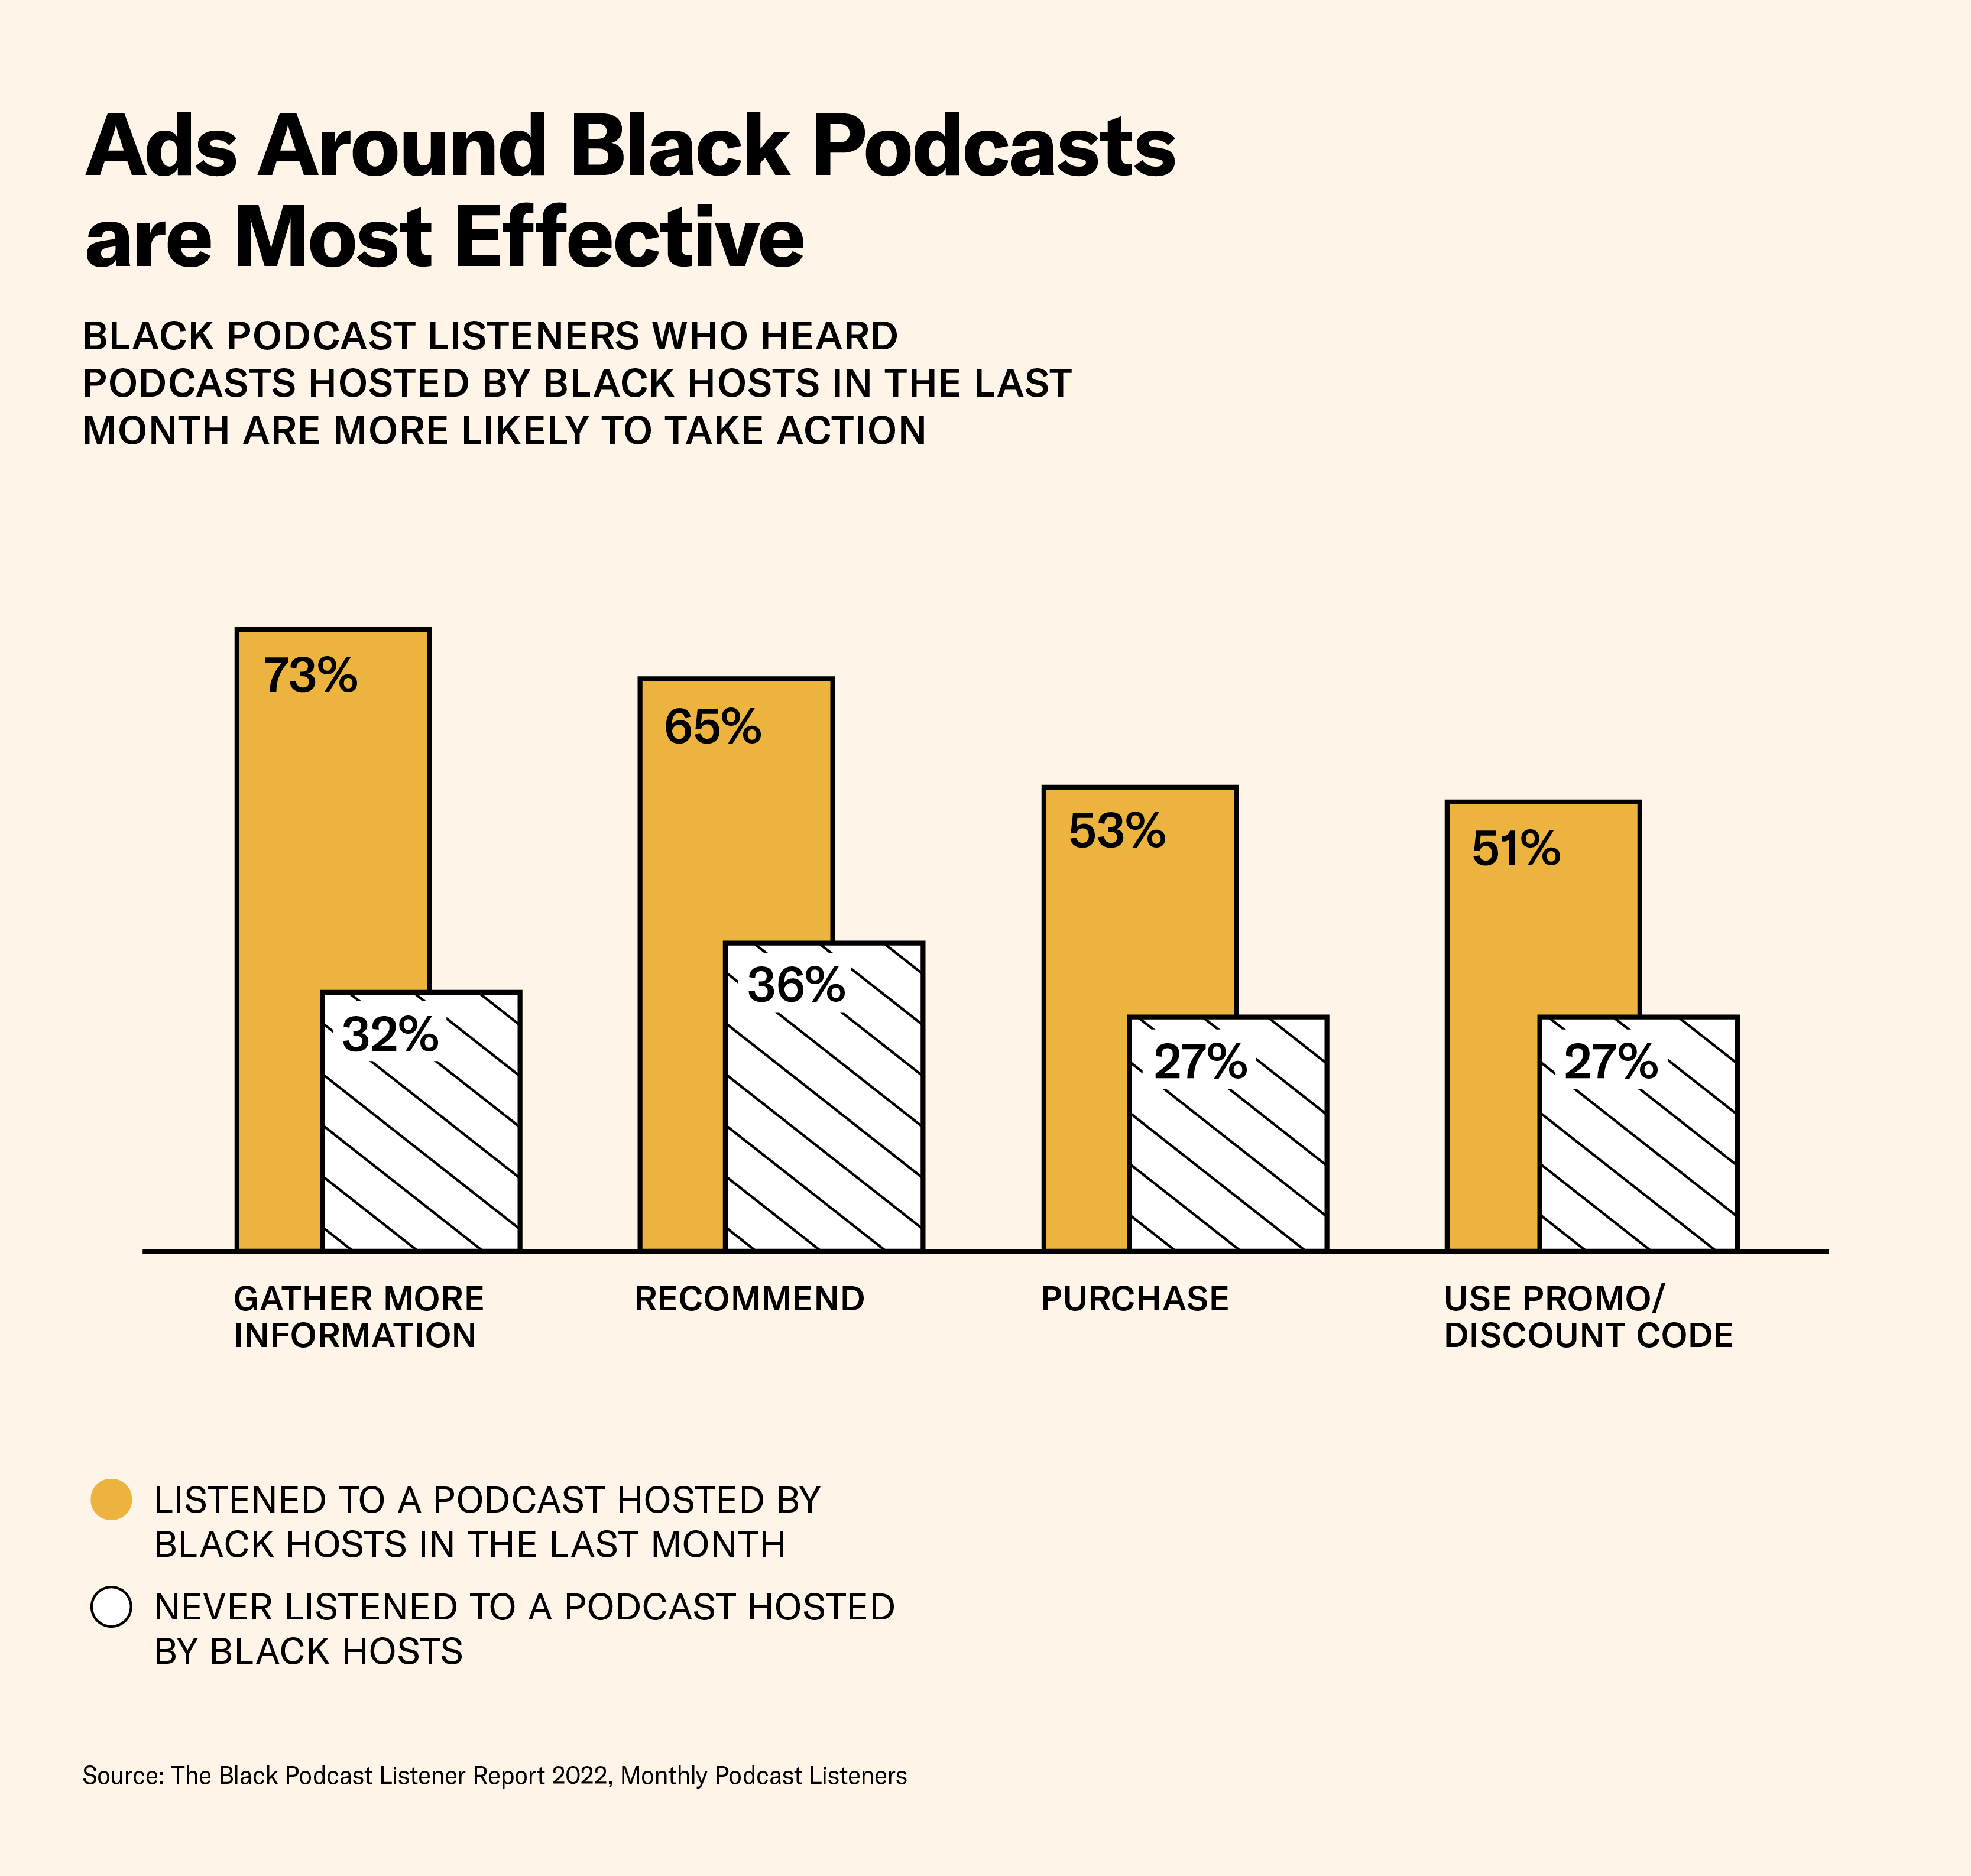 Ads Around Black Podcasts are Most Effective